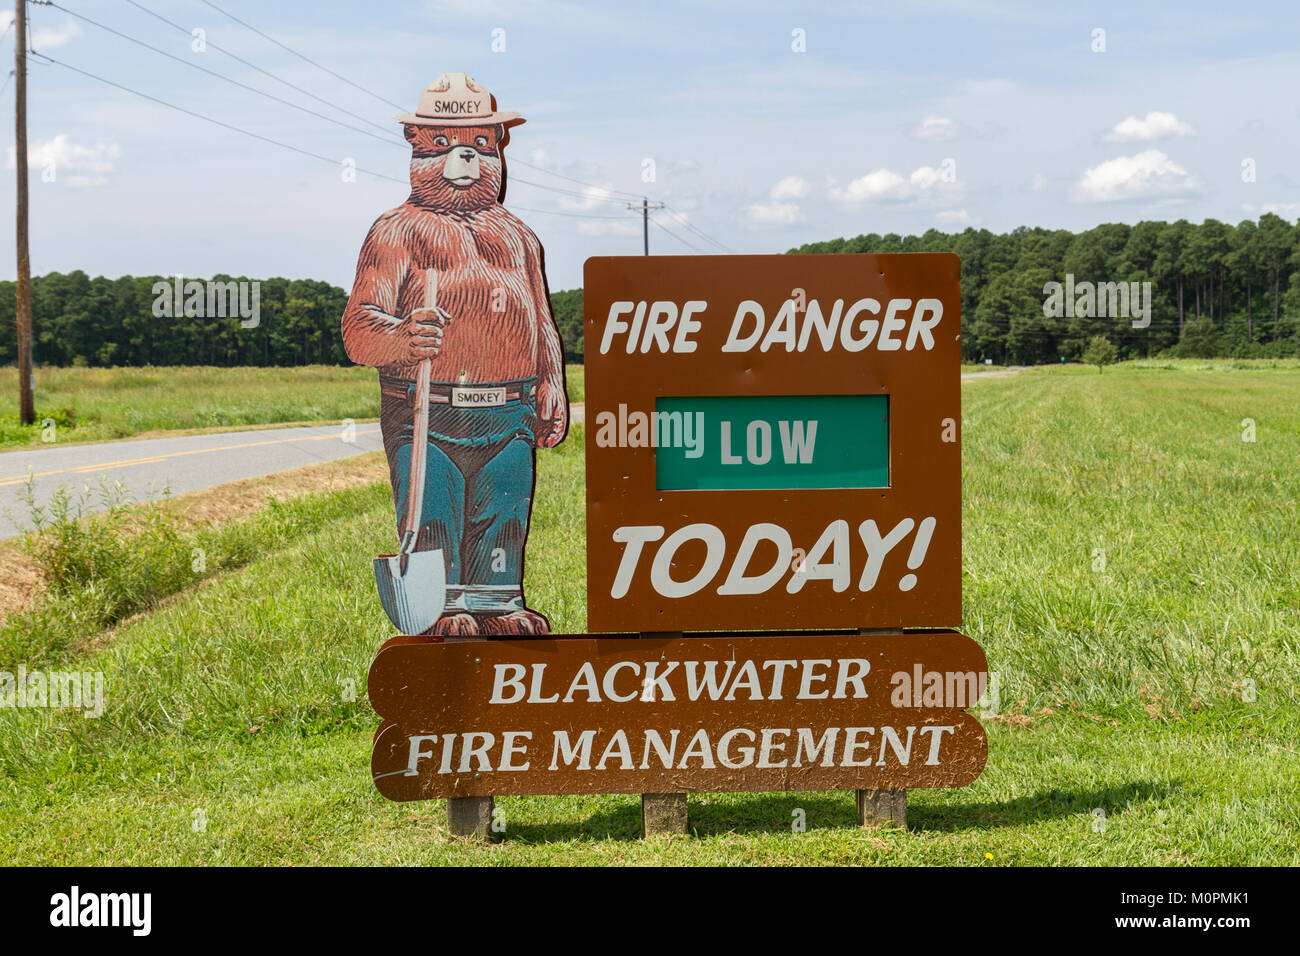 A Fire Danger fire management road side sign (indicating the fire risk is 'Low'), in Blackwater, Maryland, United States. Stock Photo